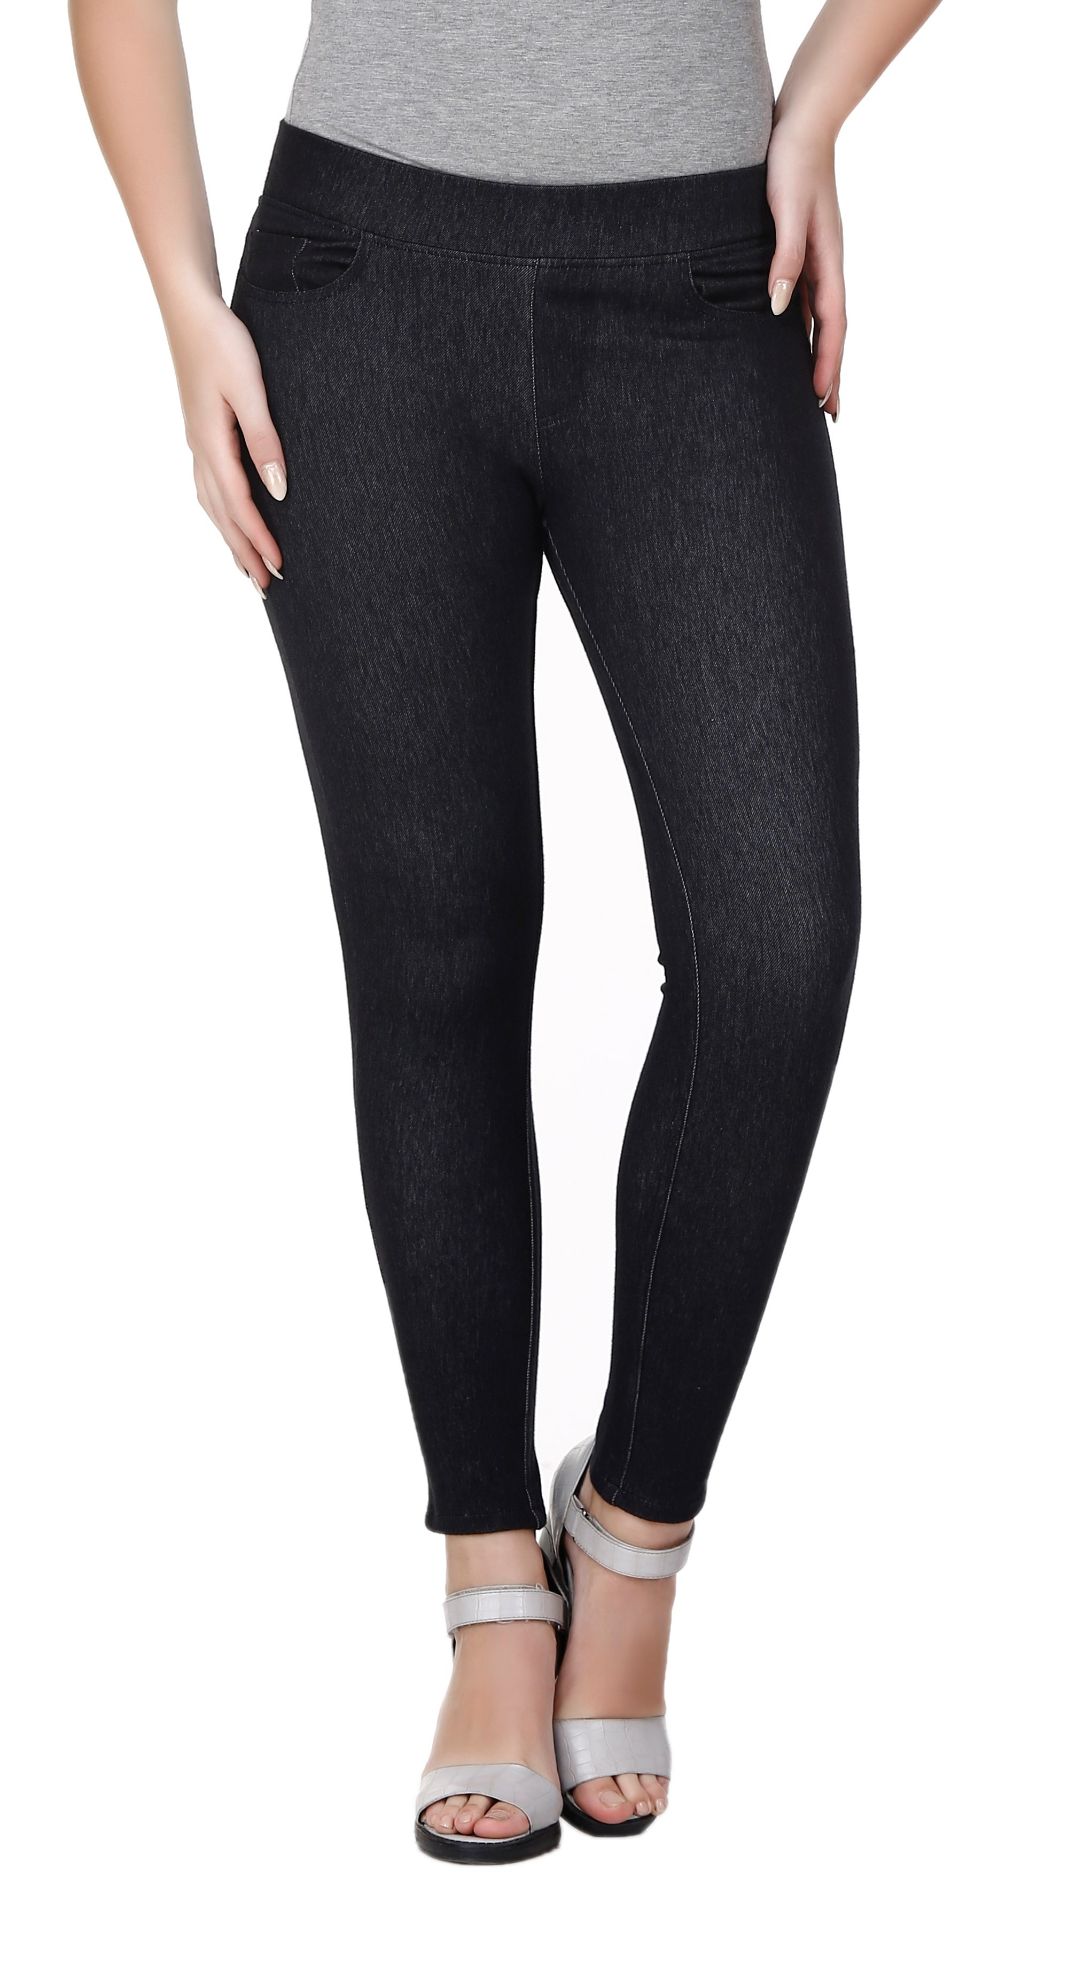 https://frenchtrendz.com/images/thumbs/0005390_frenchtrendz-cotton-viscose-spandex-black-jeggings.jpeg